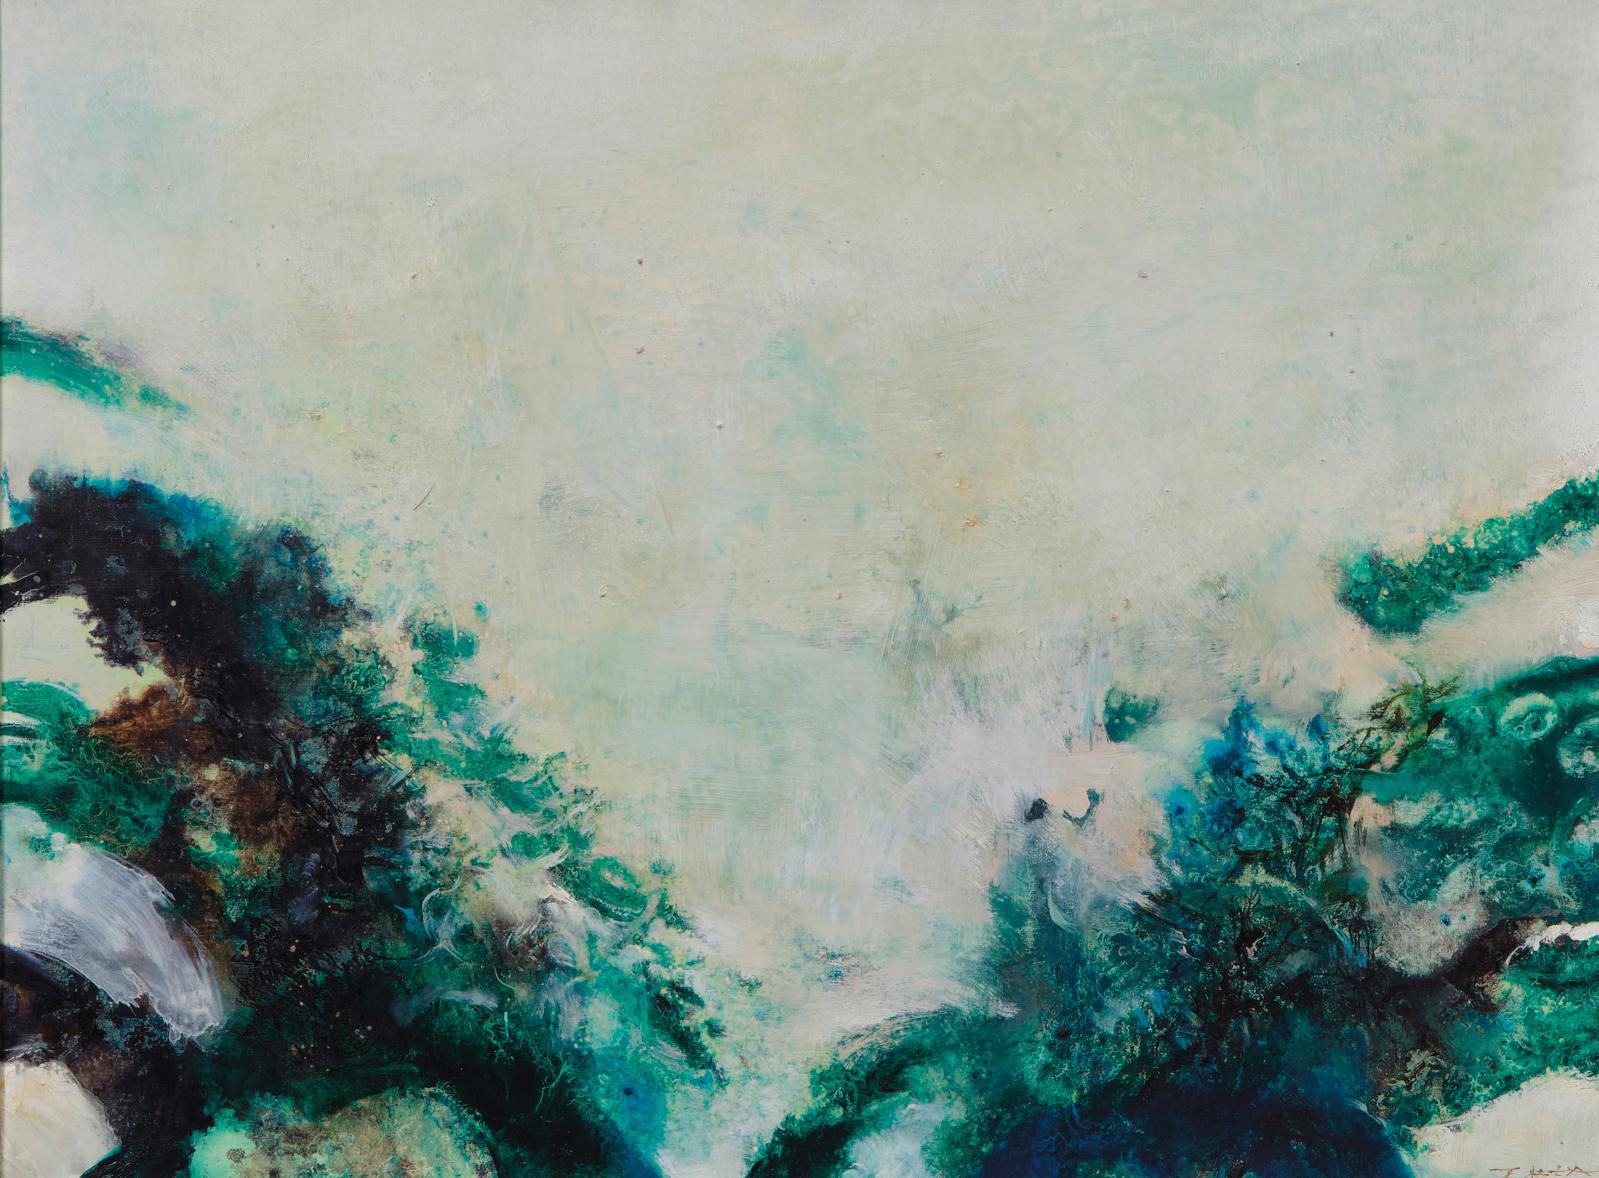 The “Empty” and the “Whole” by Zao Wou-ki